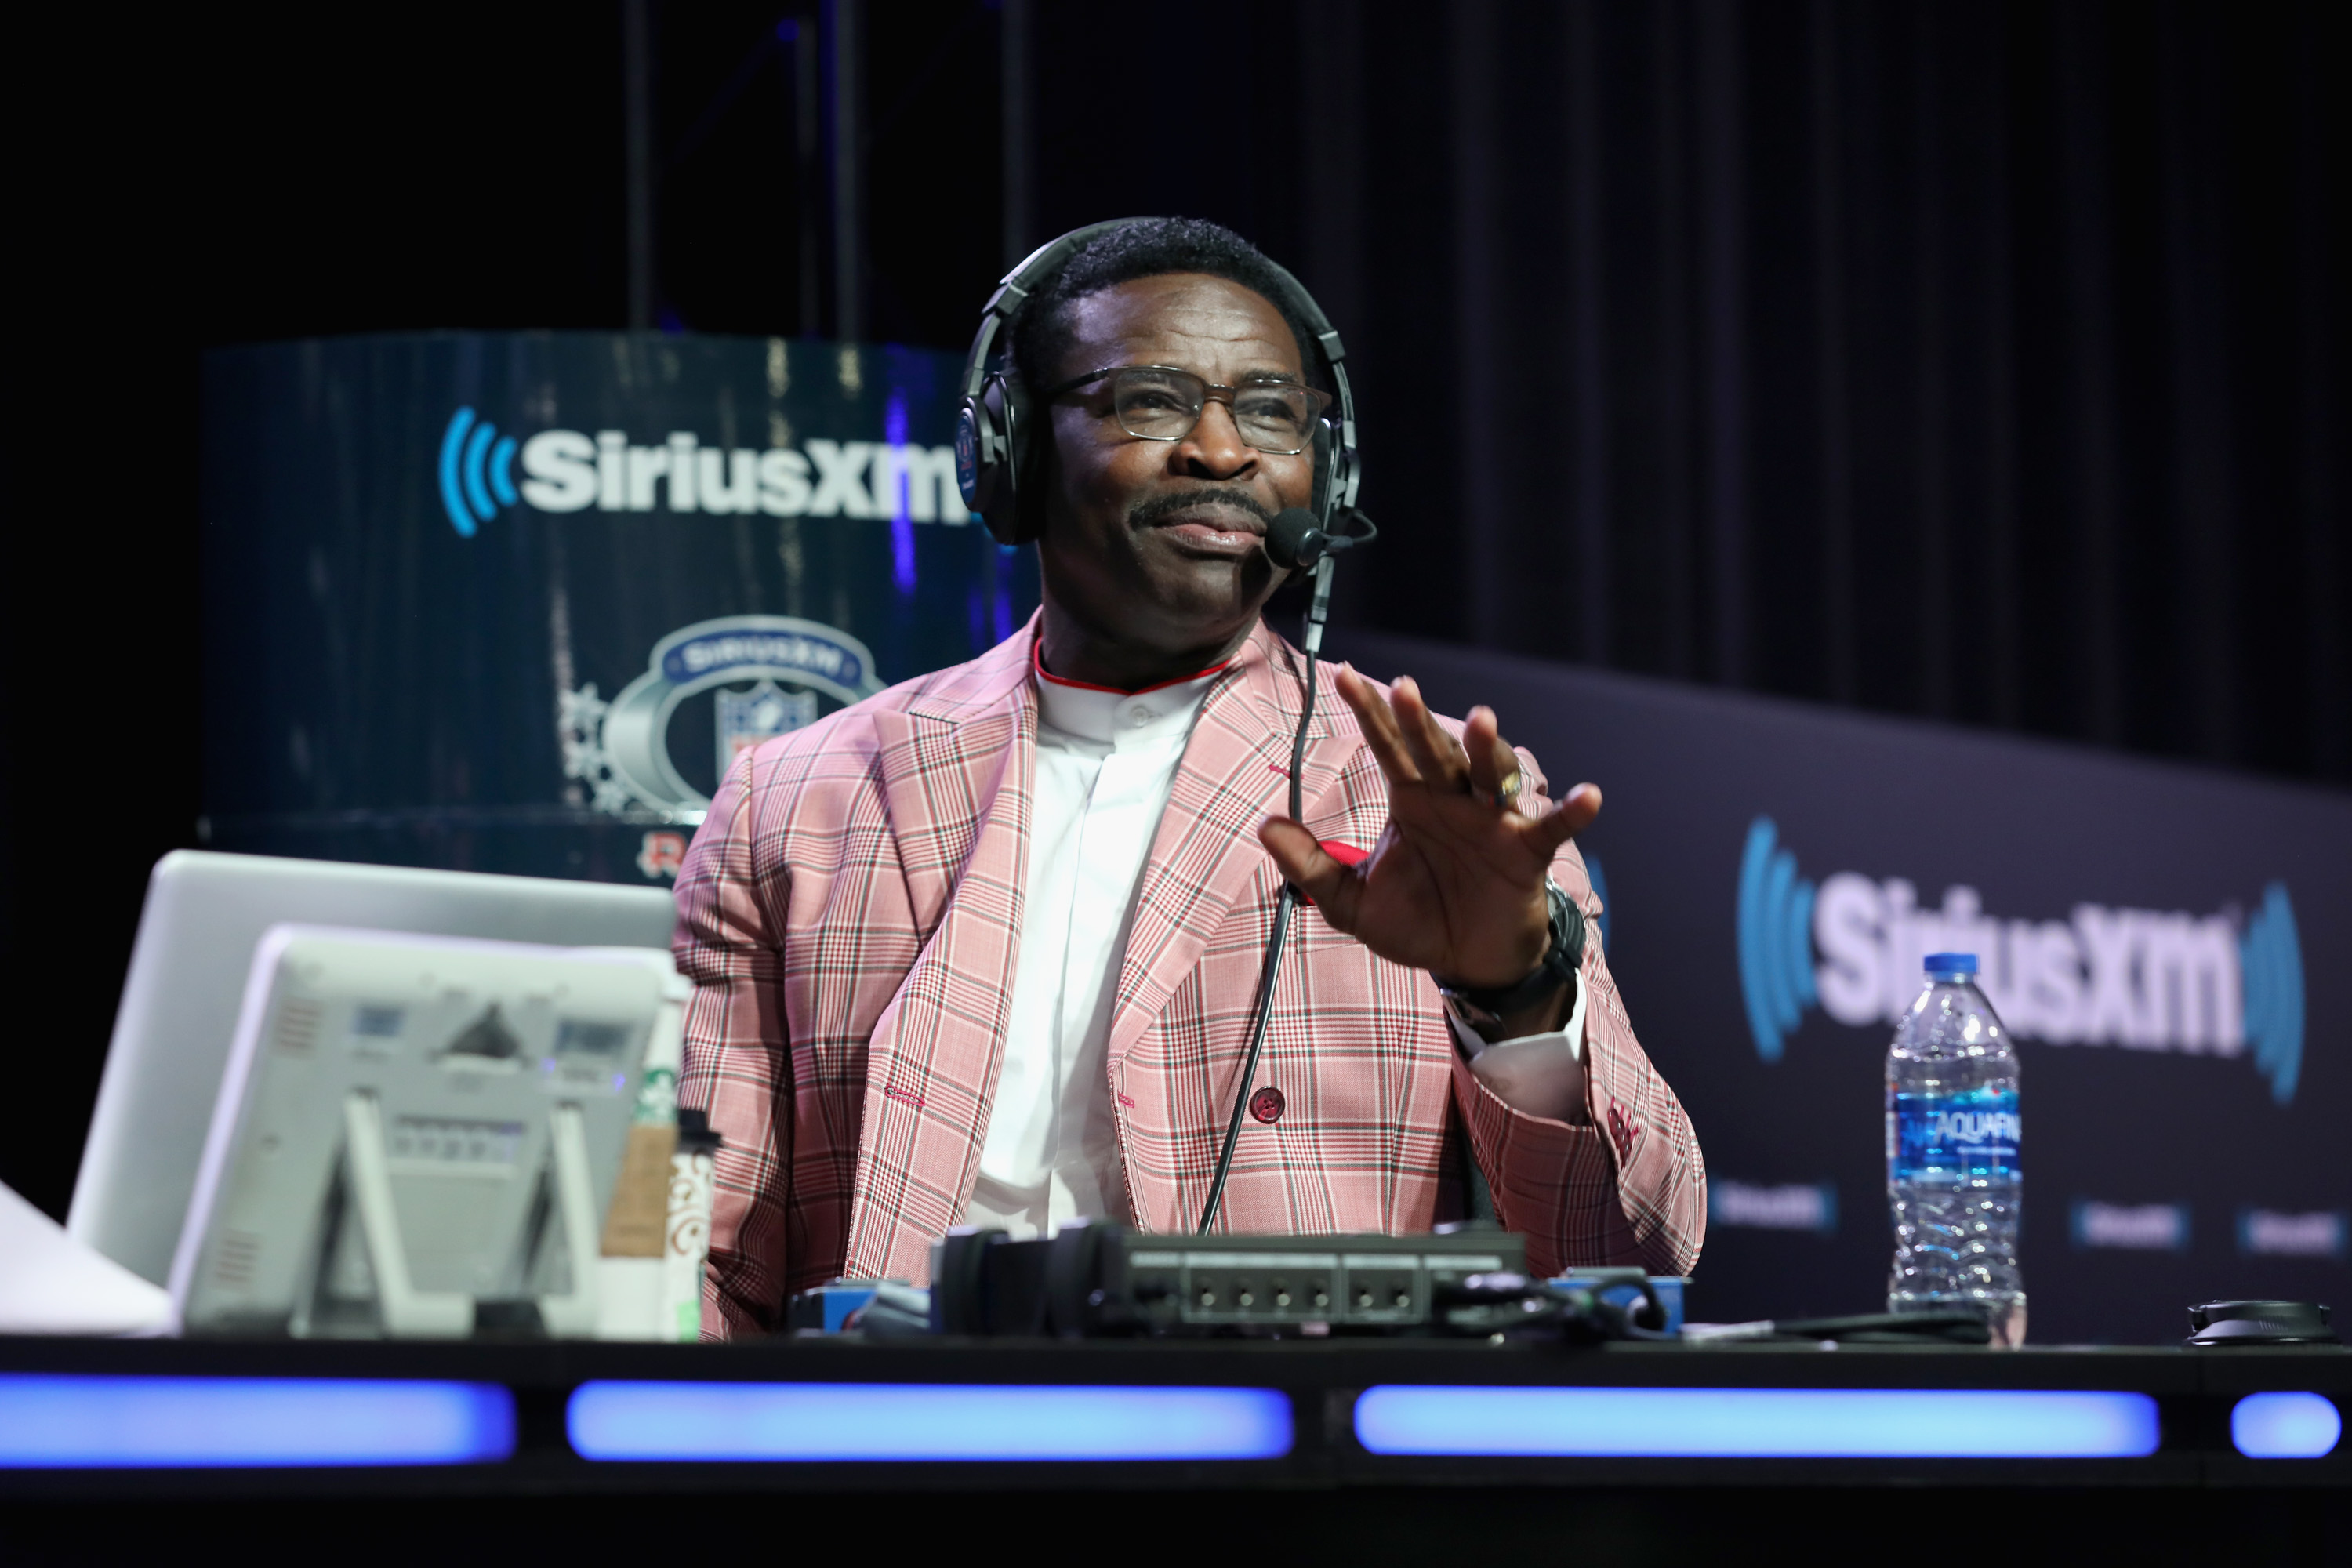 Prayers Pouring In For Michael Irvin's Family This Morning